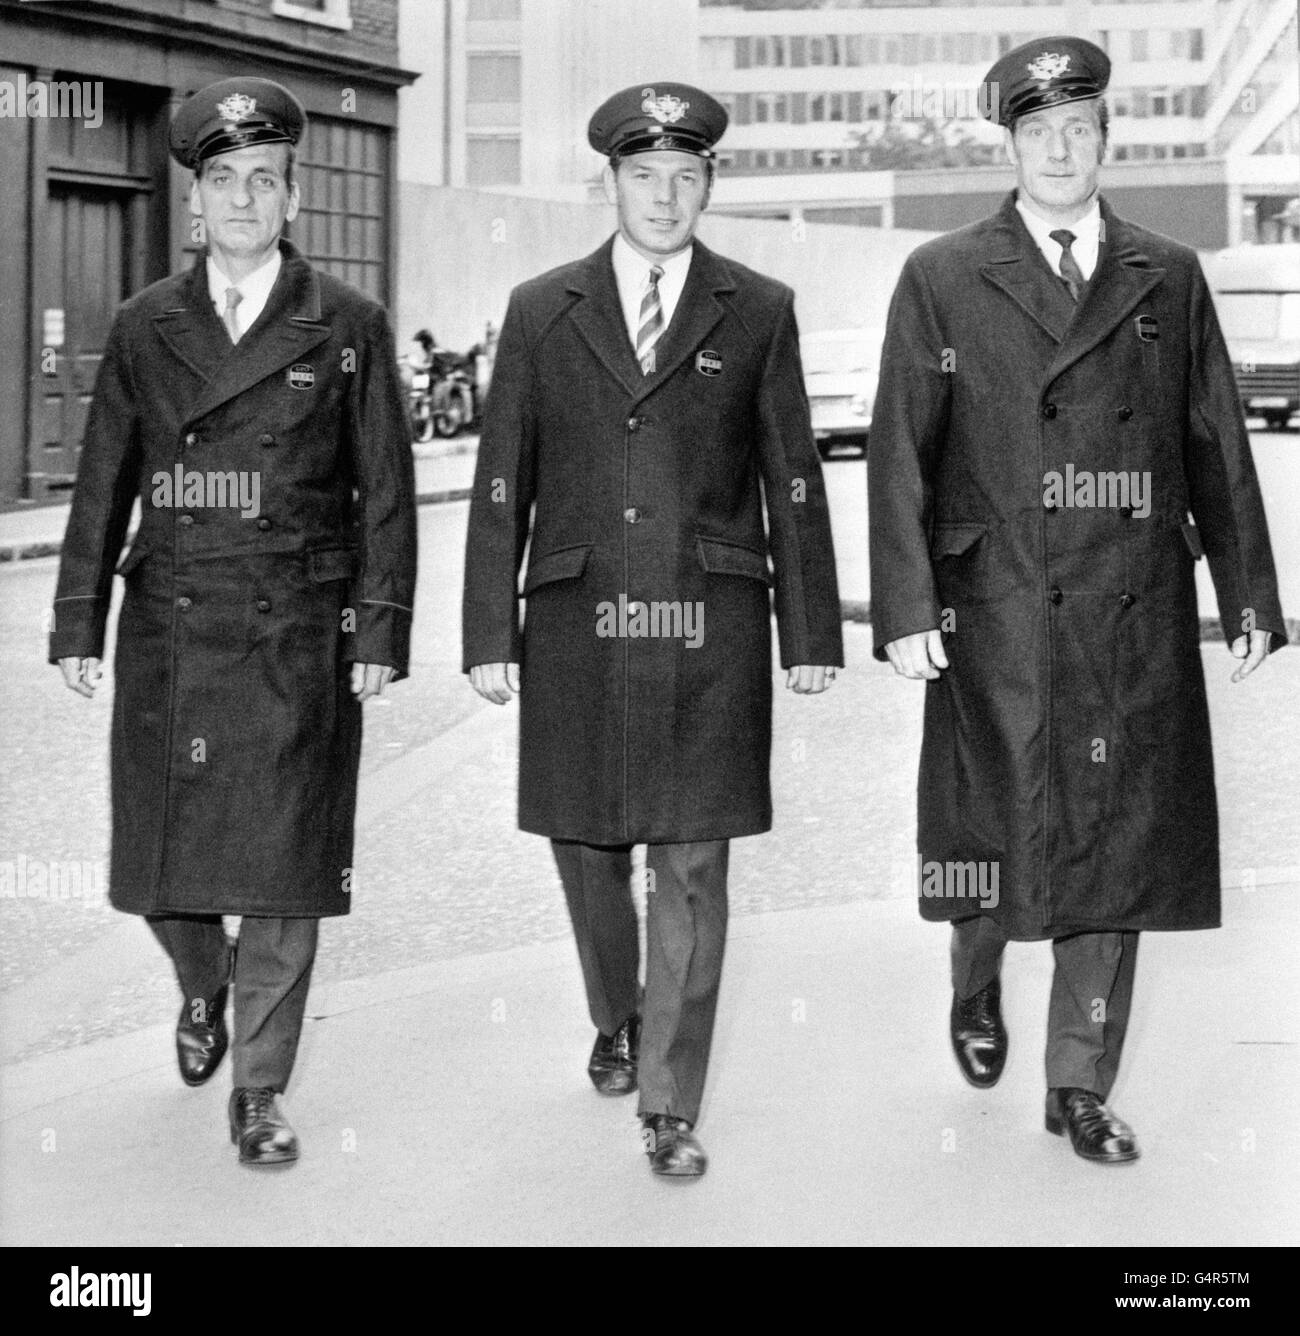 Three postmen style changes in the postman's overcoat. Postman Reg Brown (l) in the red piping coat first issued in 1944, driver Derek Astley (centre) in the new three-quarter length coat to be issued this month, and postman Alf Buxton (r) in the old coat without piping issued in 1969 Stock Photo